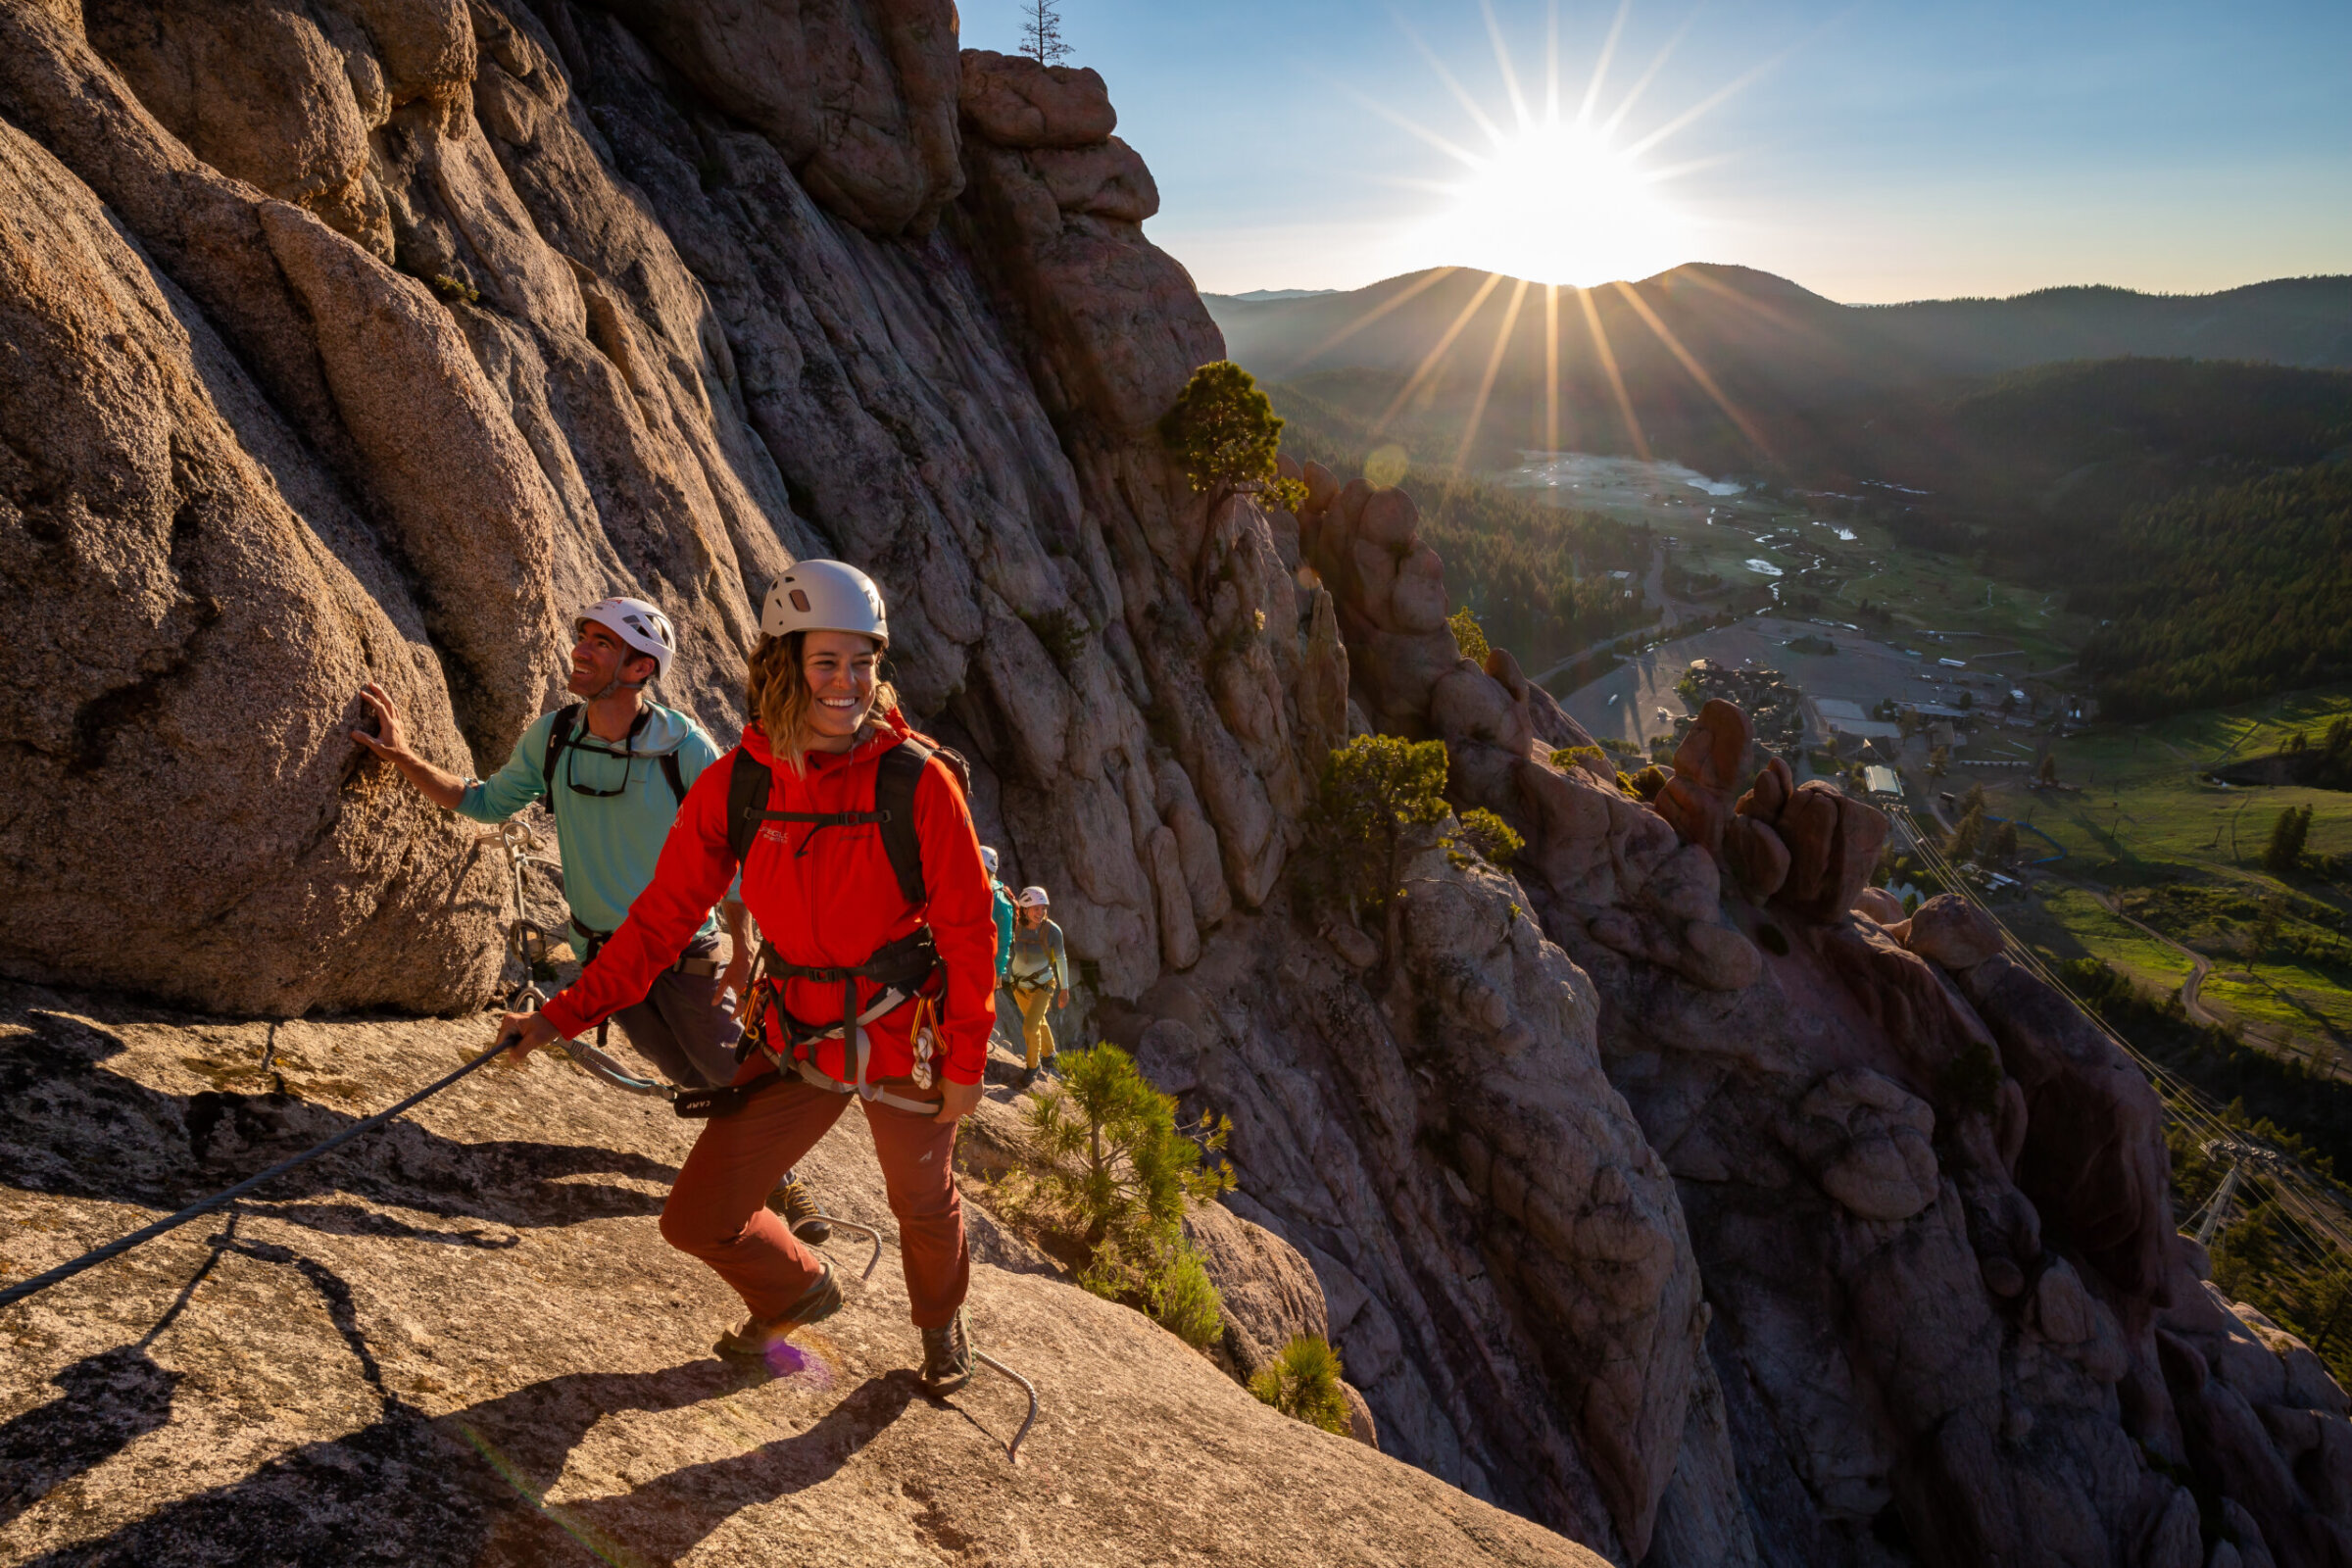 Climbers on the Tahoe Via Ferrata during the summer